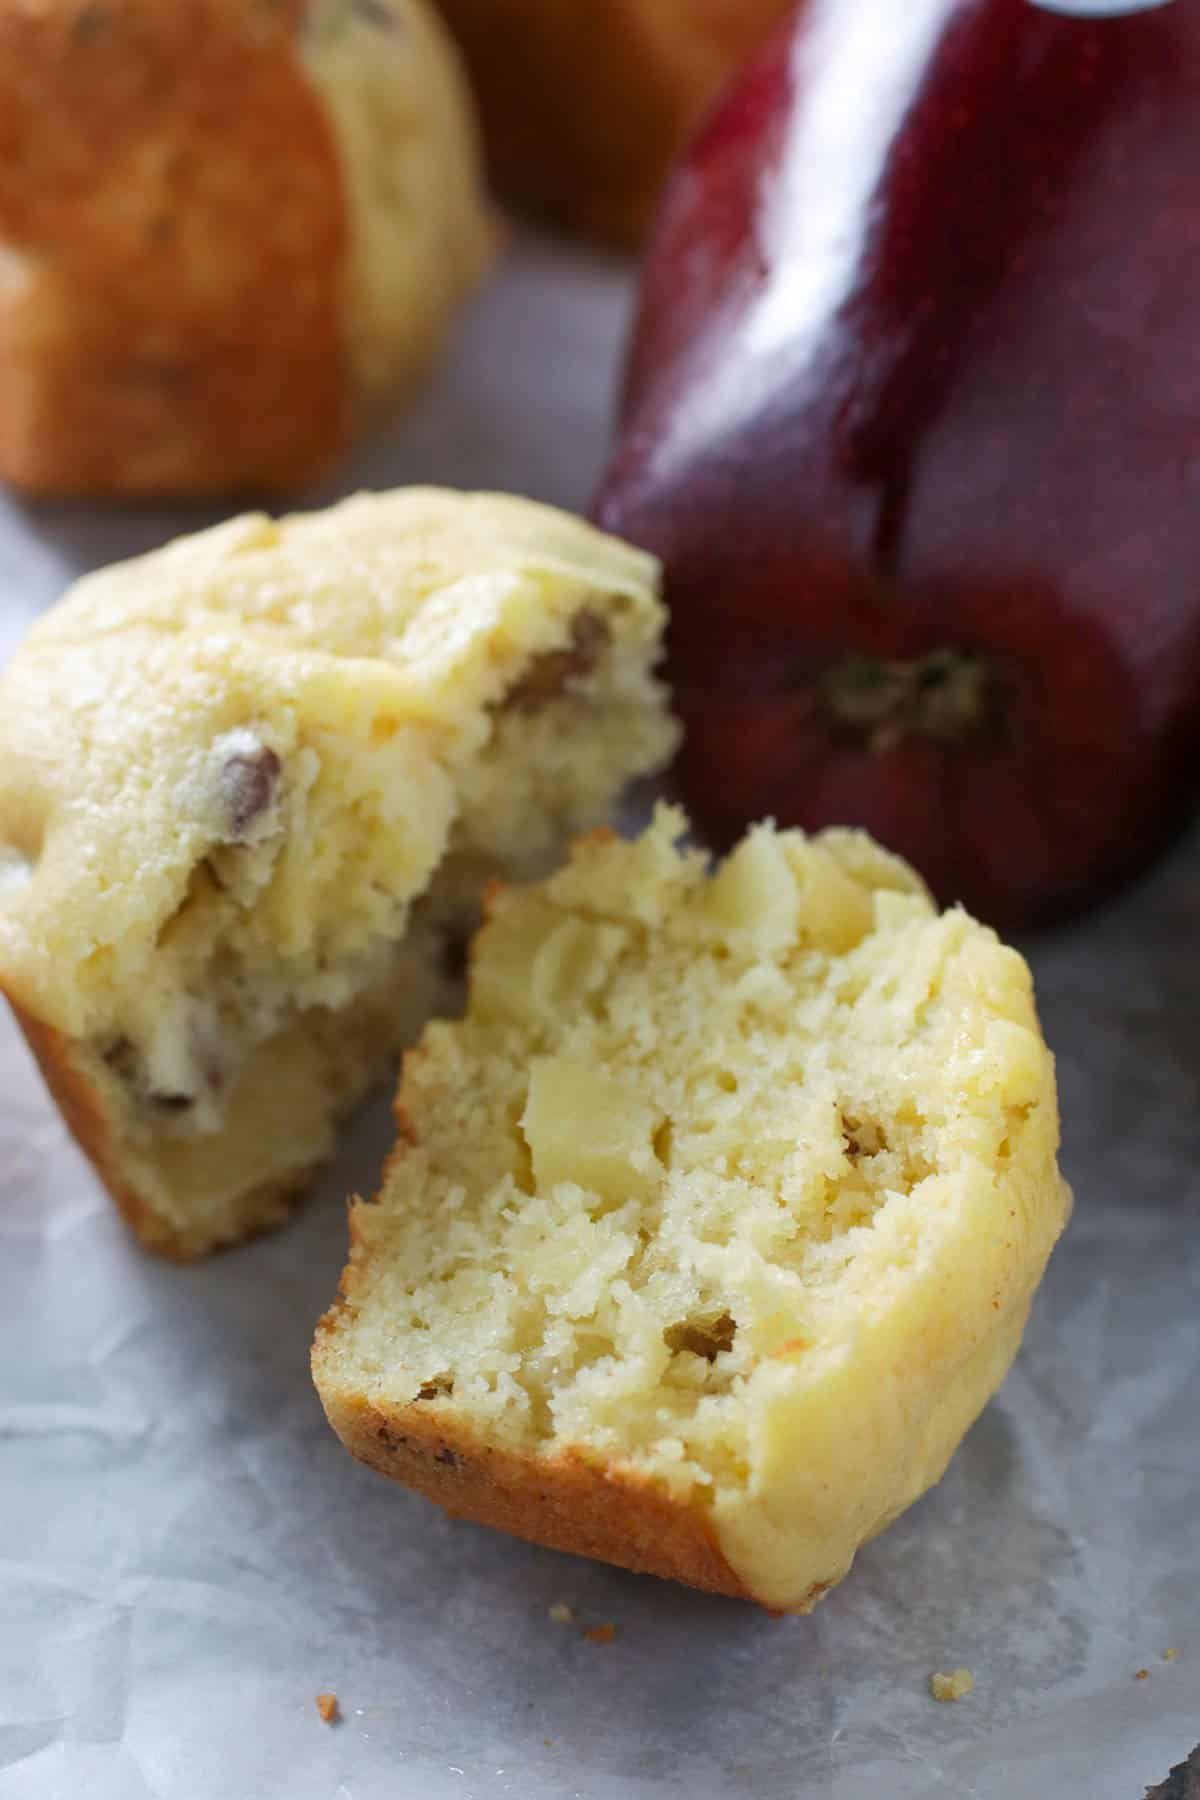 An Apple cornbread muffin sliced in half to show crumbs.